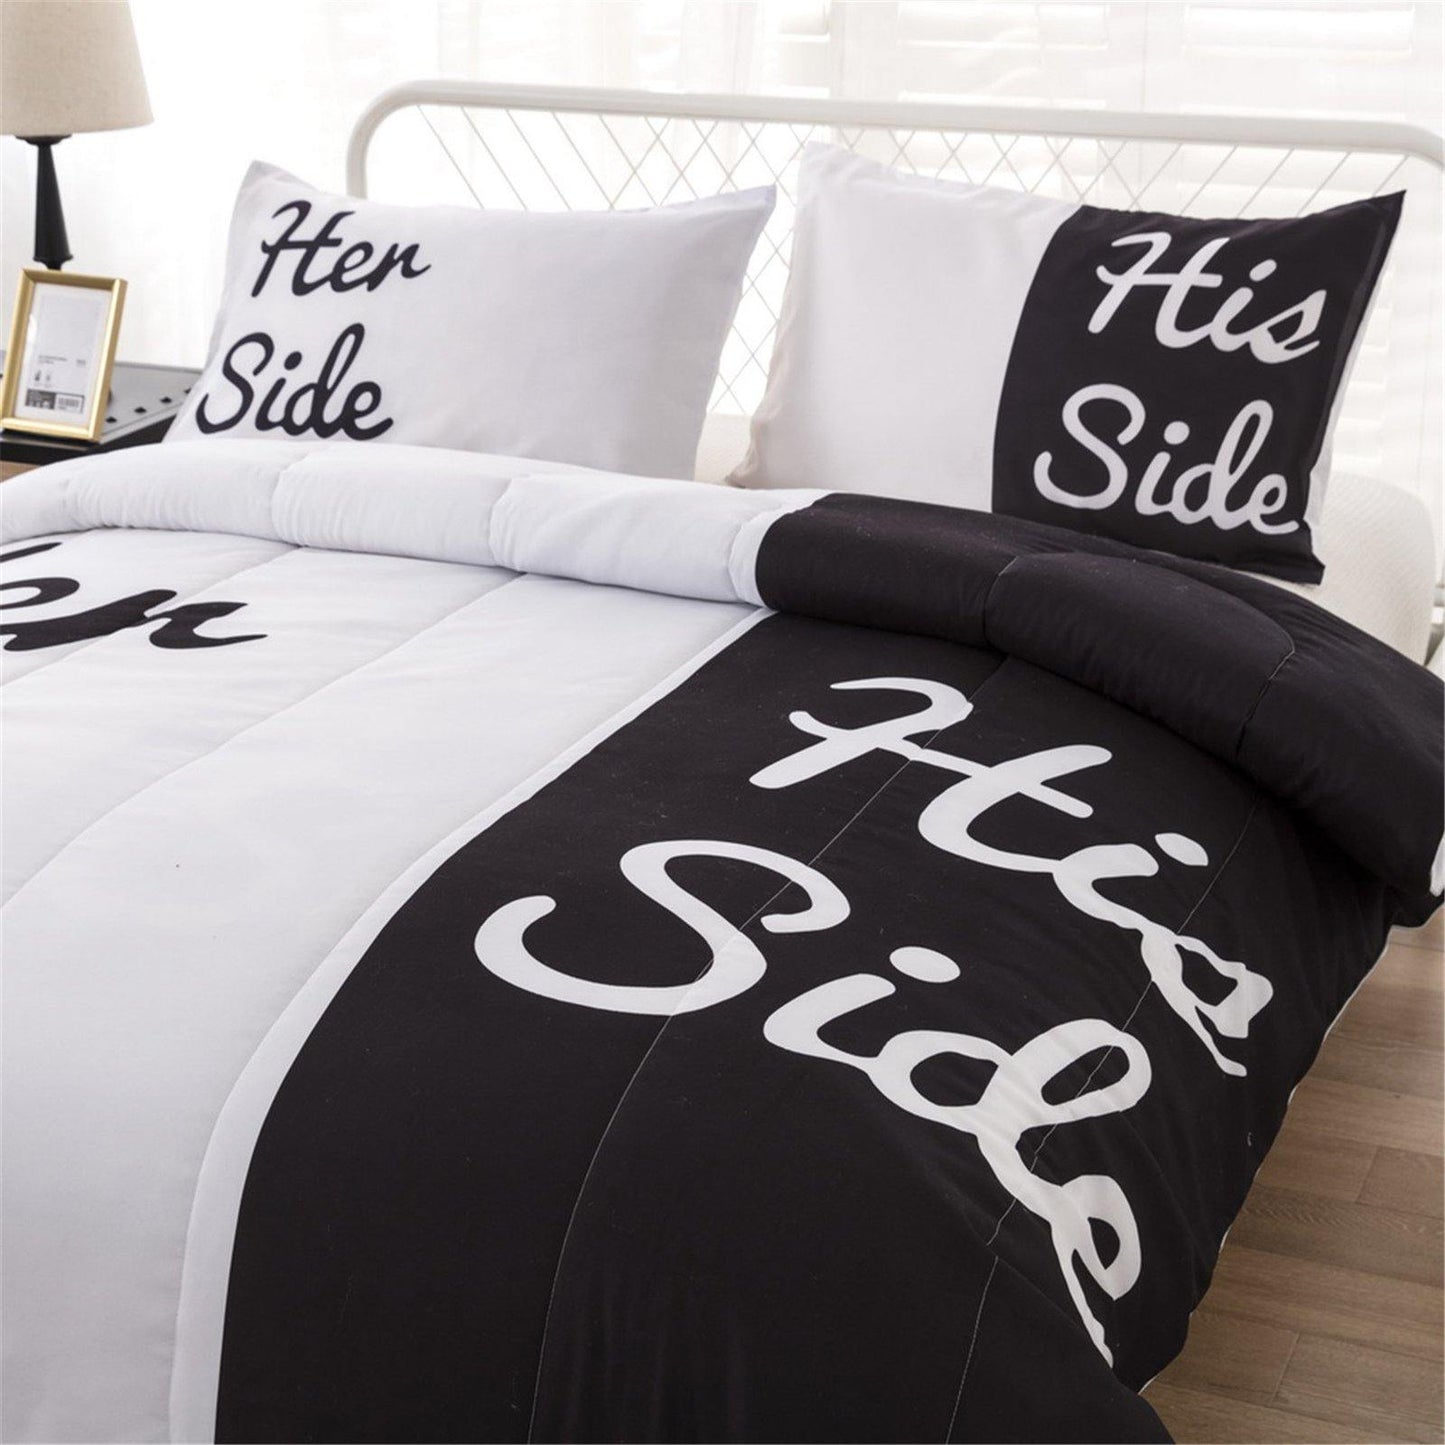 WONGS BEDDING Black and white letters comforter set bedroom bedding 3 Pieces Bedding Comforter with 2 Pillow Cases suitable for the whole season - Wongs bedding